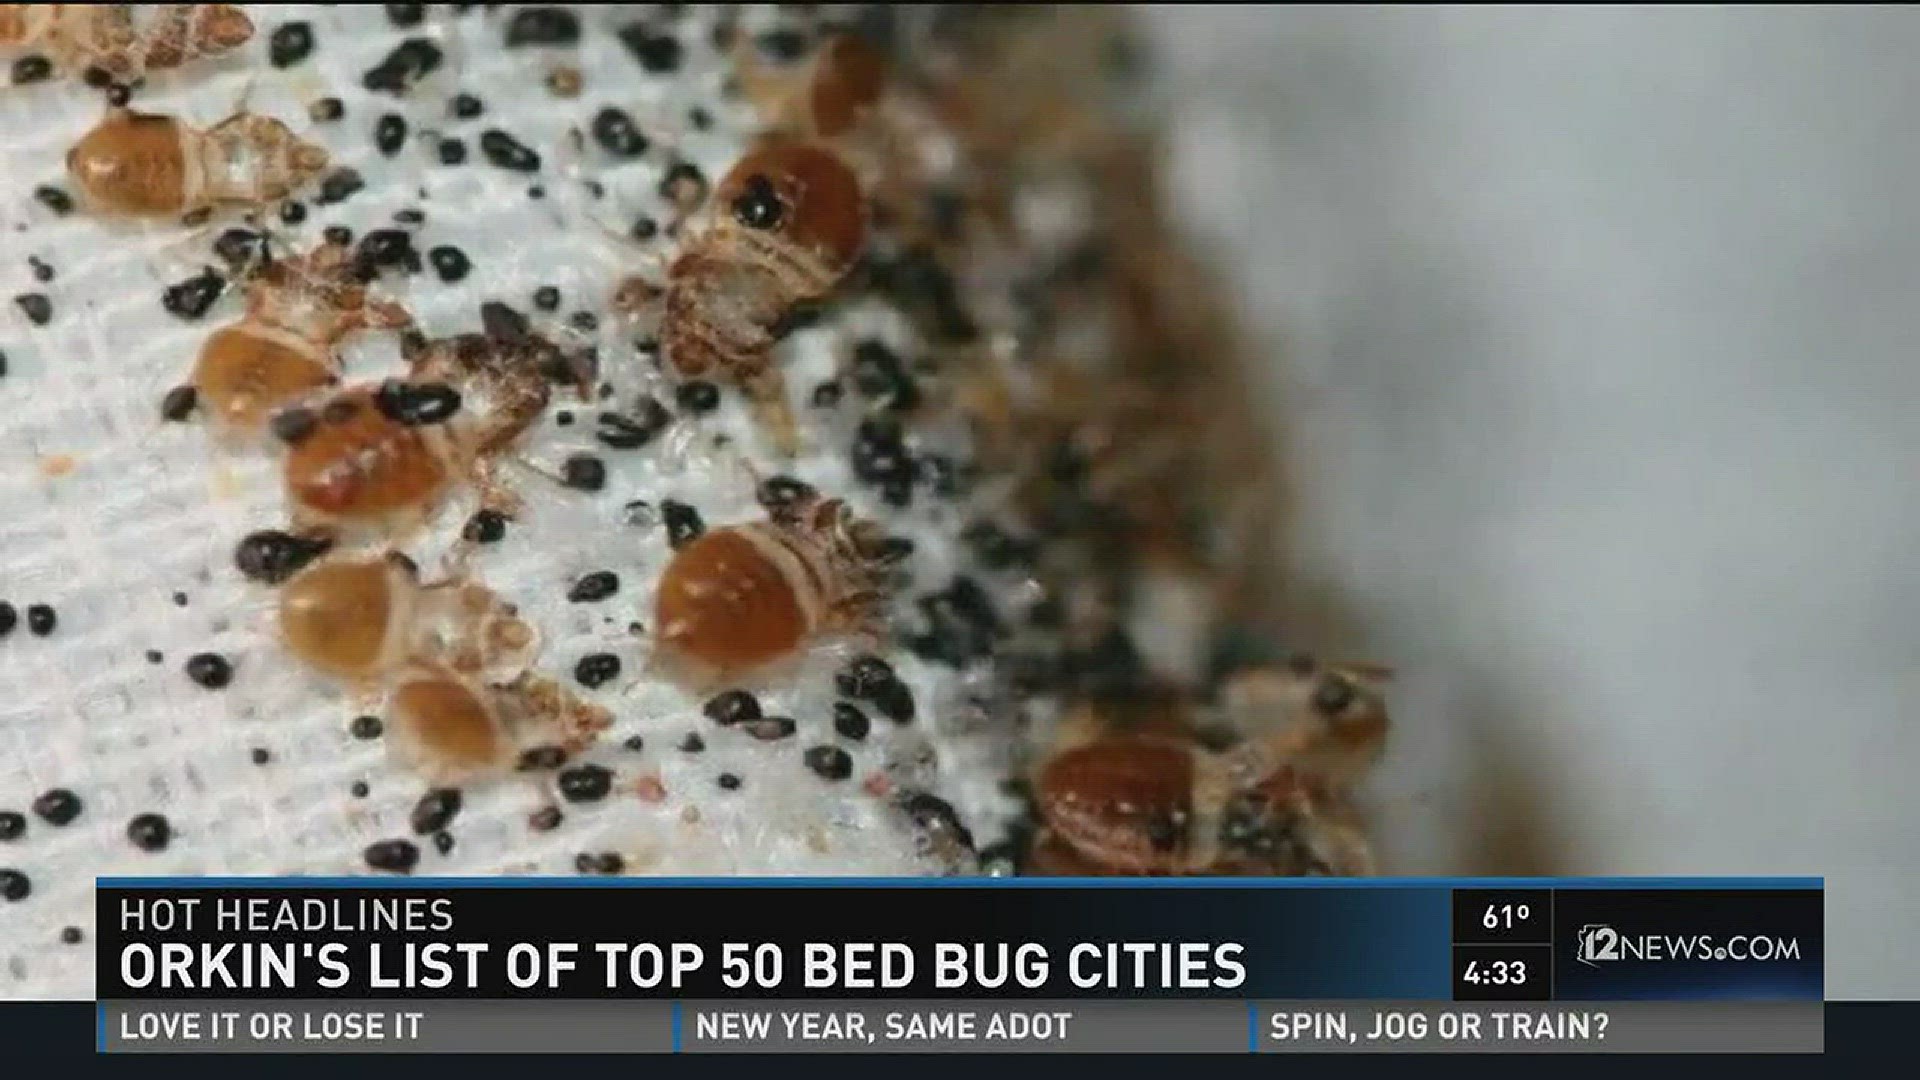 Orkin releases their 2016 top bed bug cities.